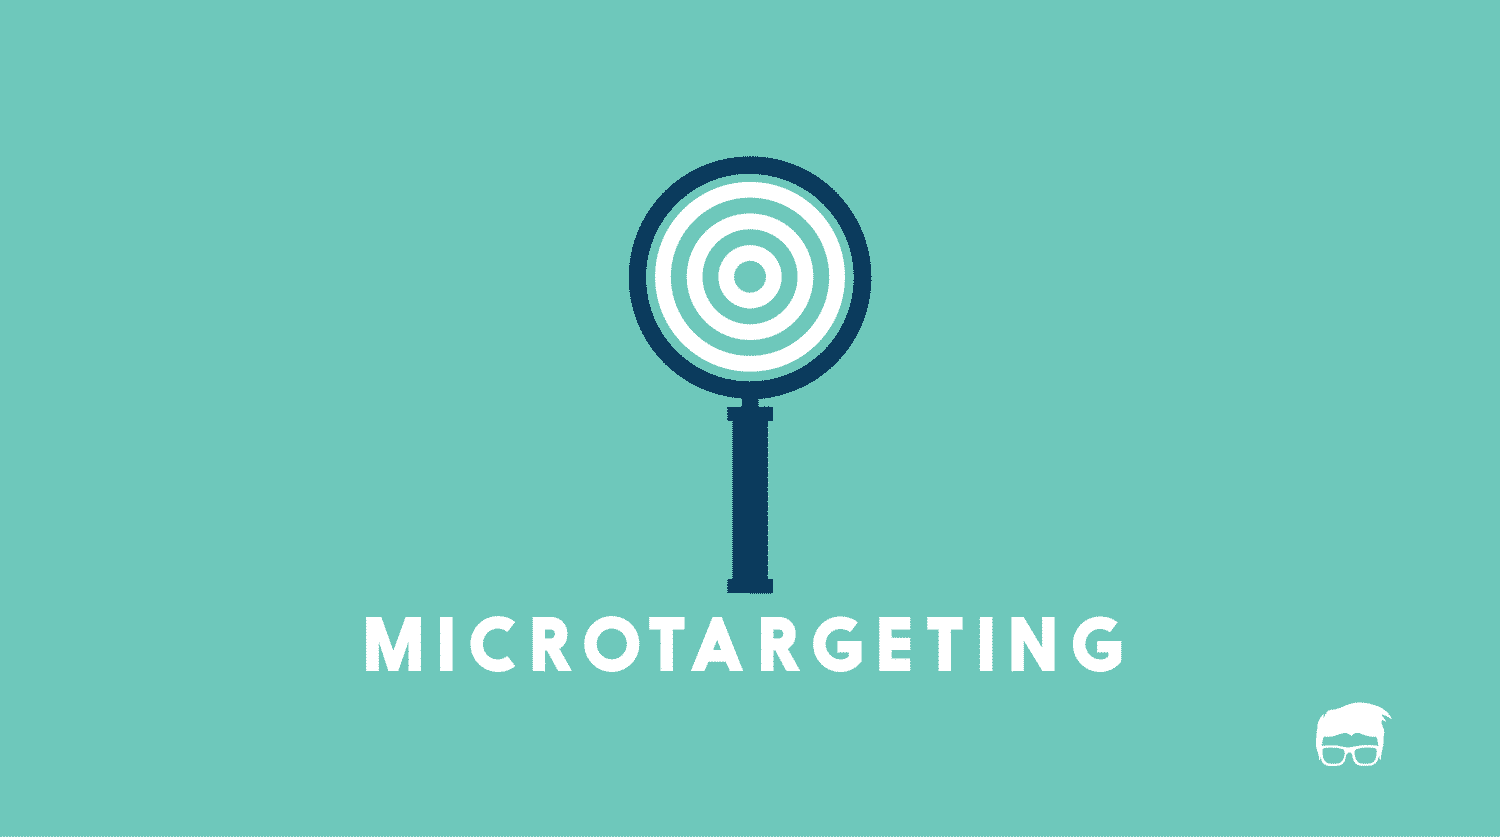 What Is Microtargeting?